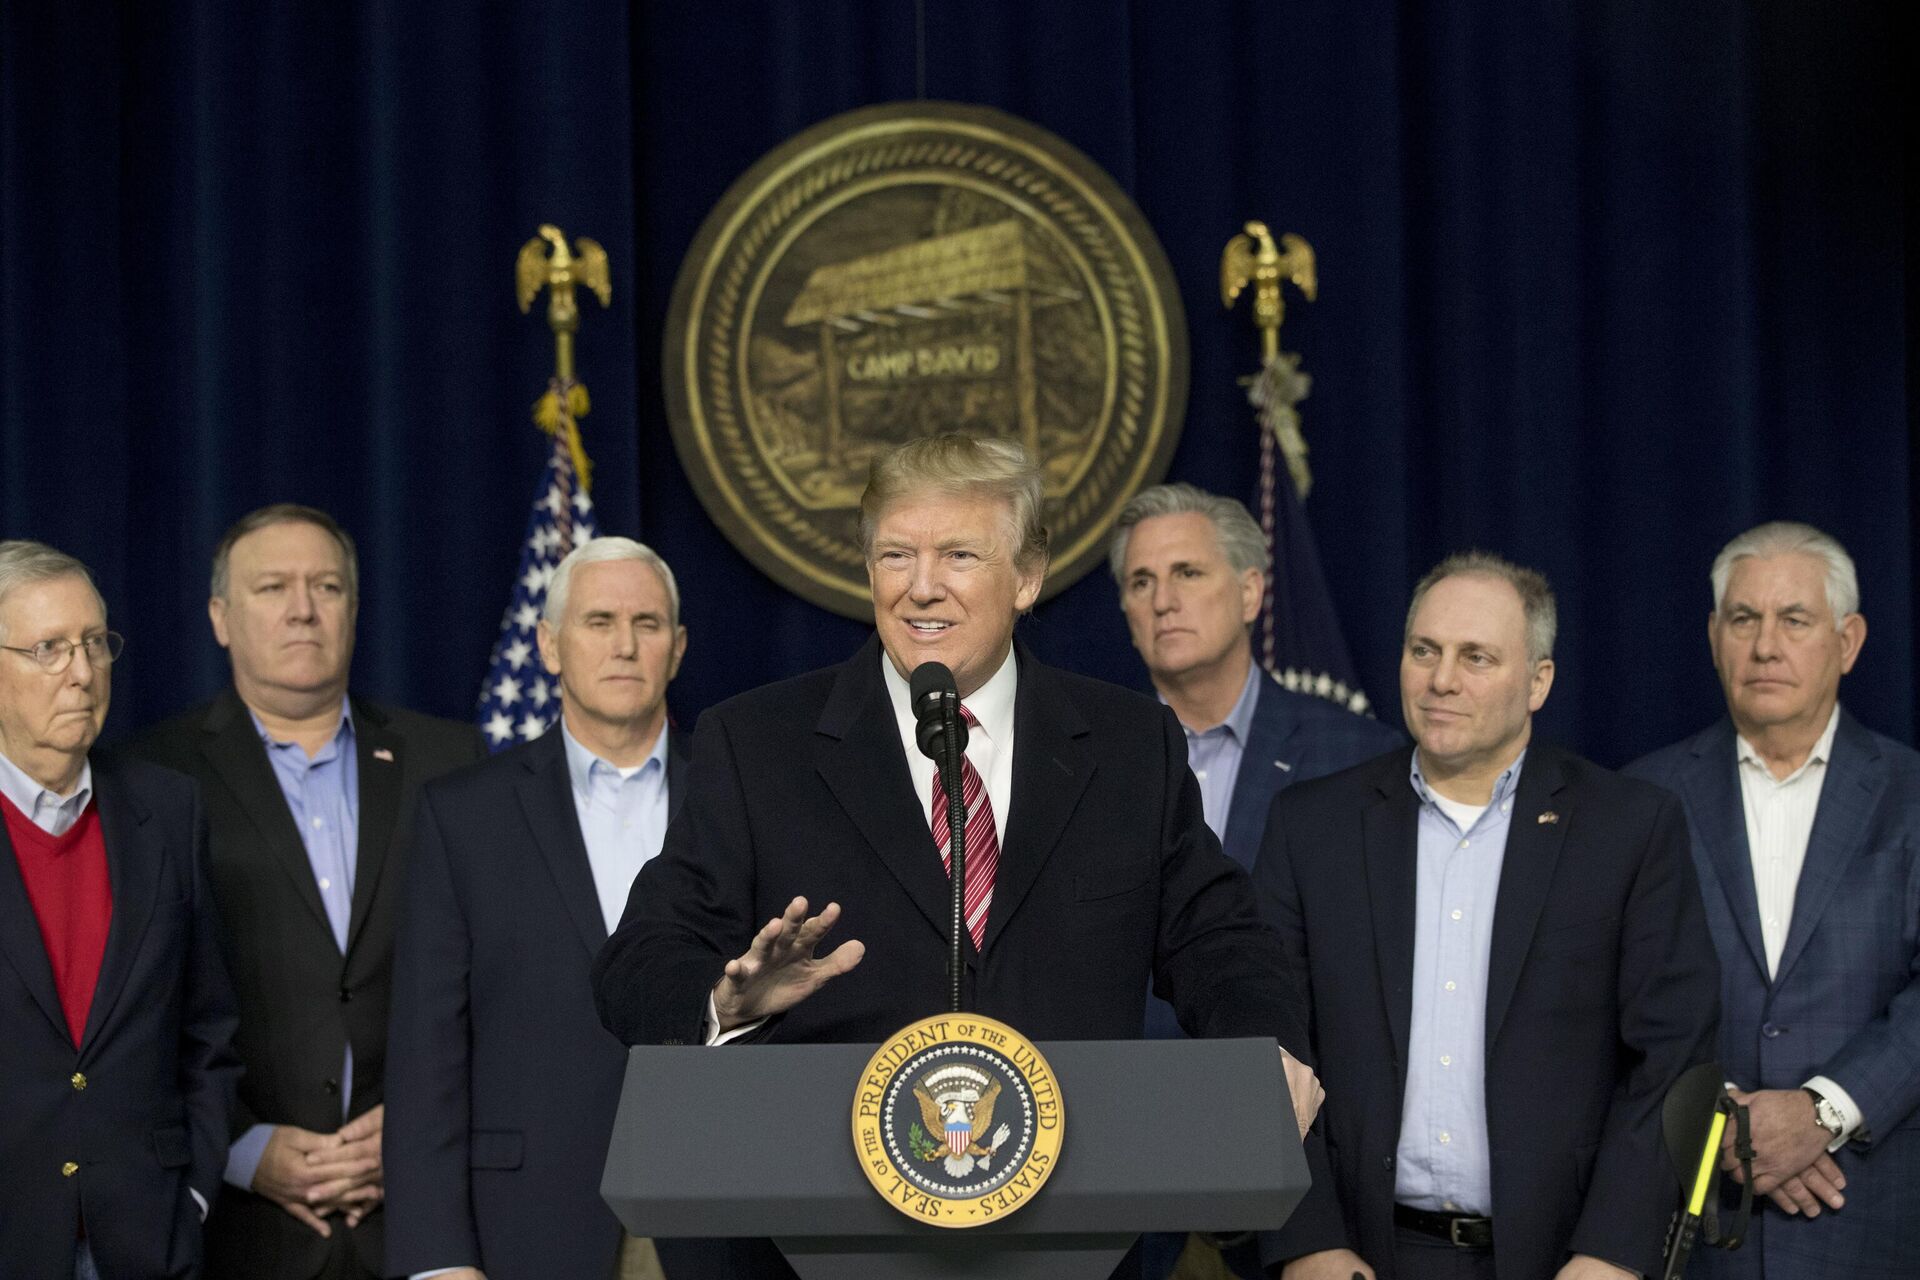 FILE - President Donald Trump, center, accompanied by from left, Senate Majority Leader Mitch McConnell of Ky., CIA Director Mike Pompeo, Vice President Mike Pence, House Majority Leader Kevin McCarthy of Calif., House Majority Whip Steve Scalise, R-La., Secretary of State Rex Tillerson, speaks after participating in a Congressional Republican Leadership Retreat at Camp David, Md., Jan. 6, 2018. - Sputnik International, 1920, 11.10.2023